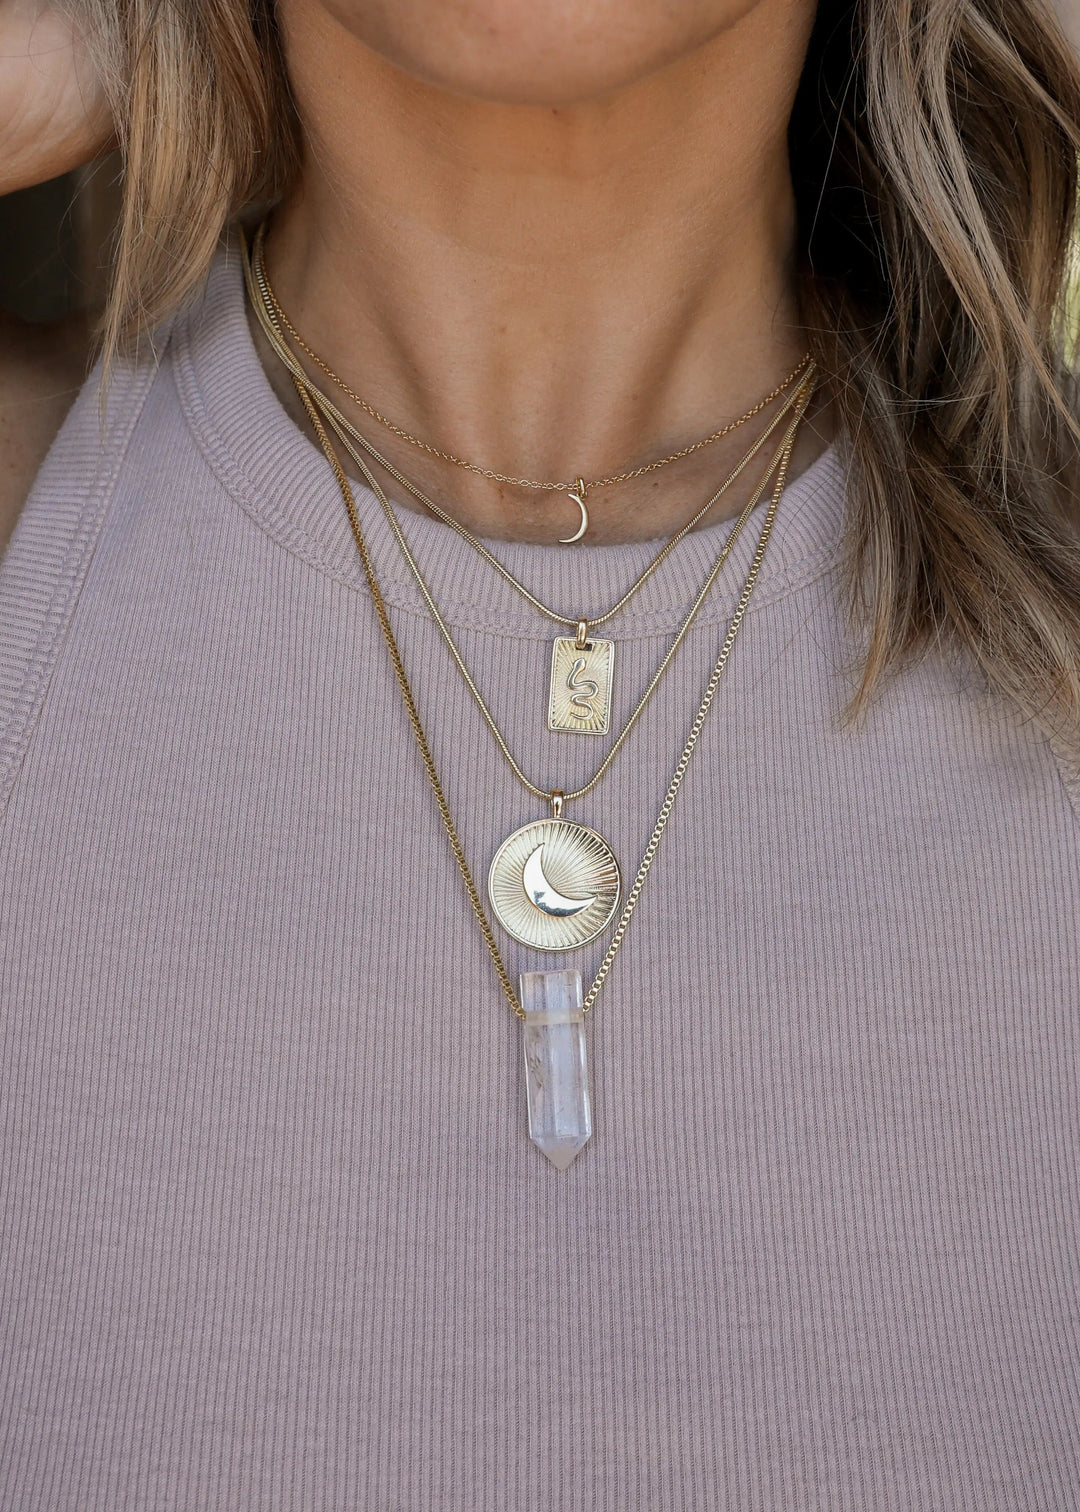 JaxKelly Ring Necklace - Clear Quartz Point